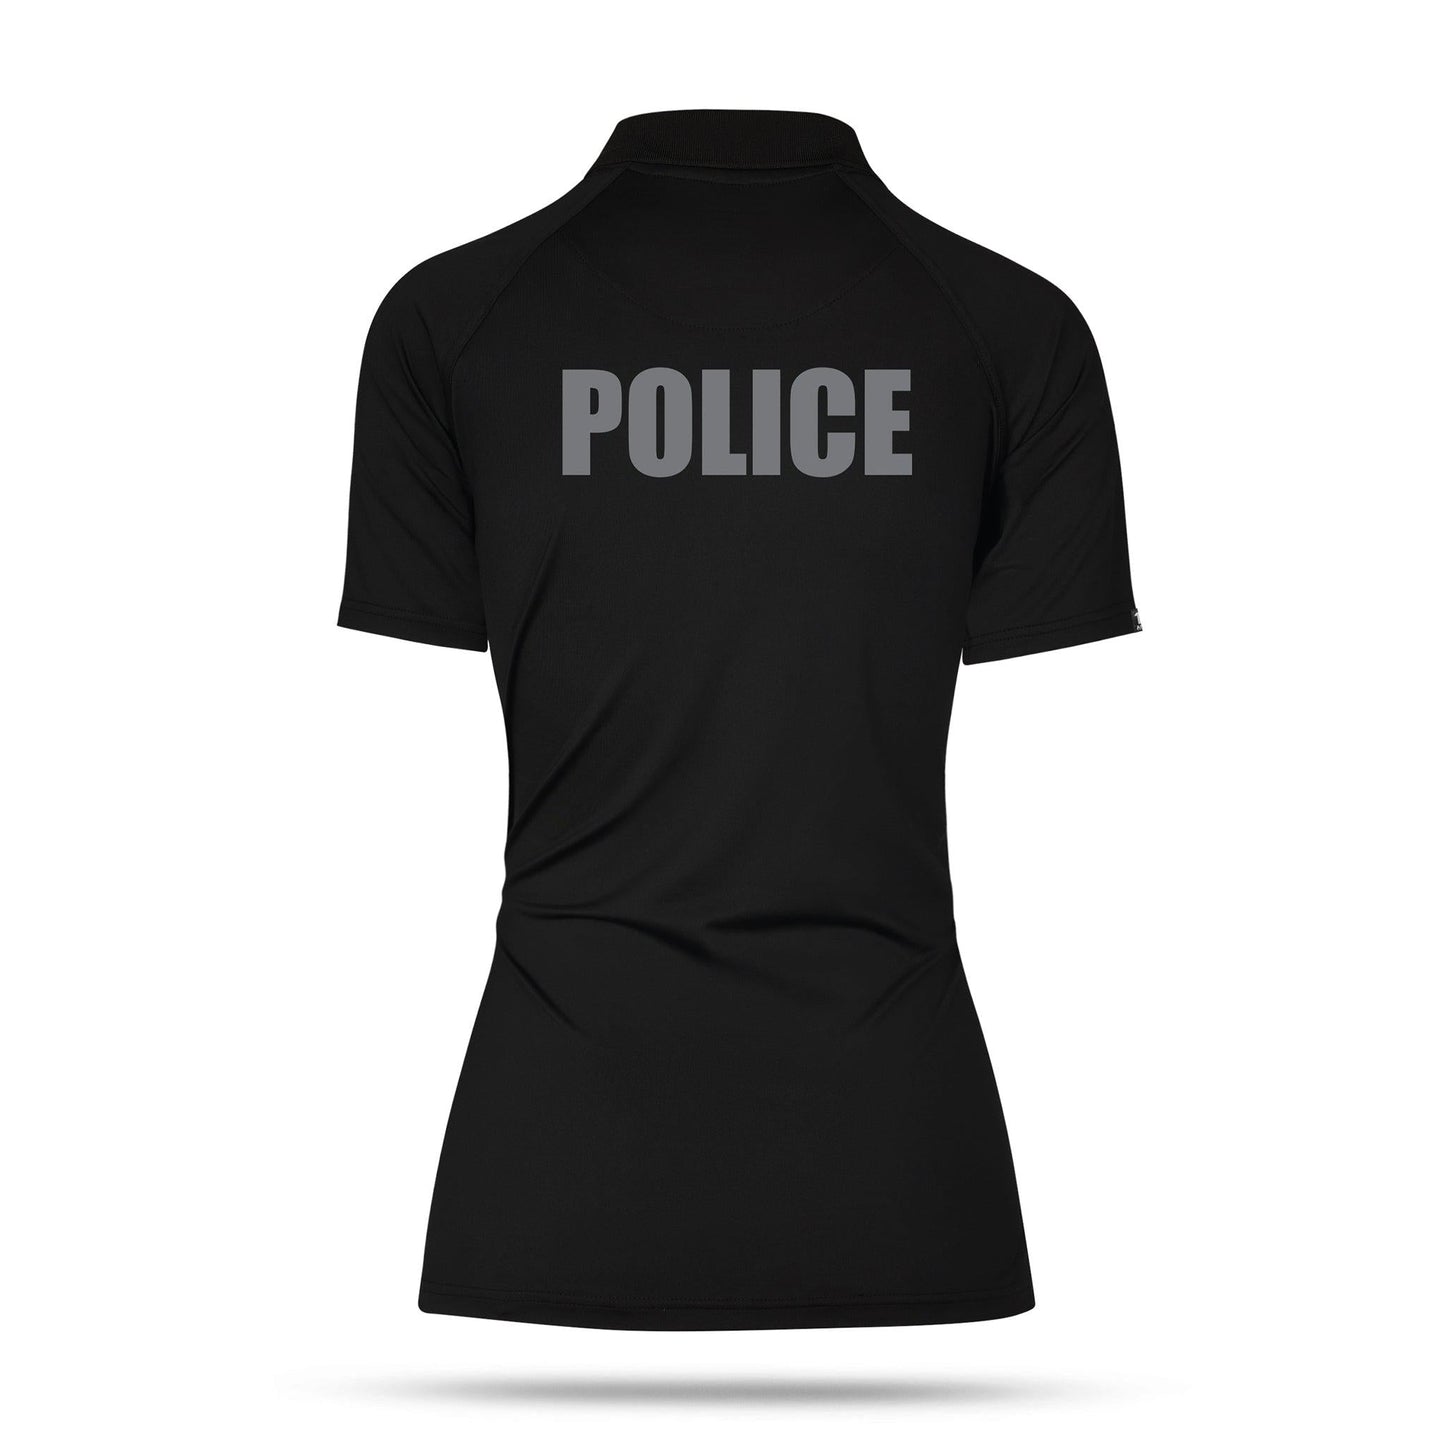 [POLICE] Women's Performance Polo [BLK/GRY]-13 Fifty Apparel